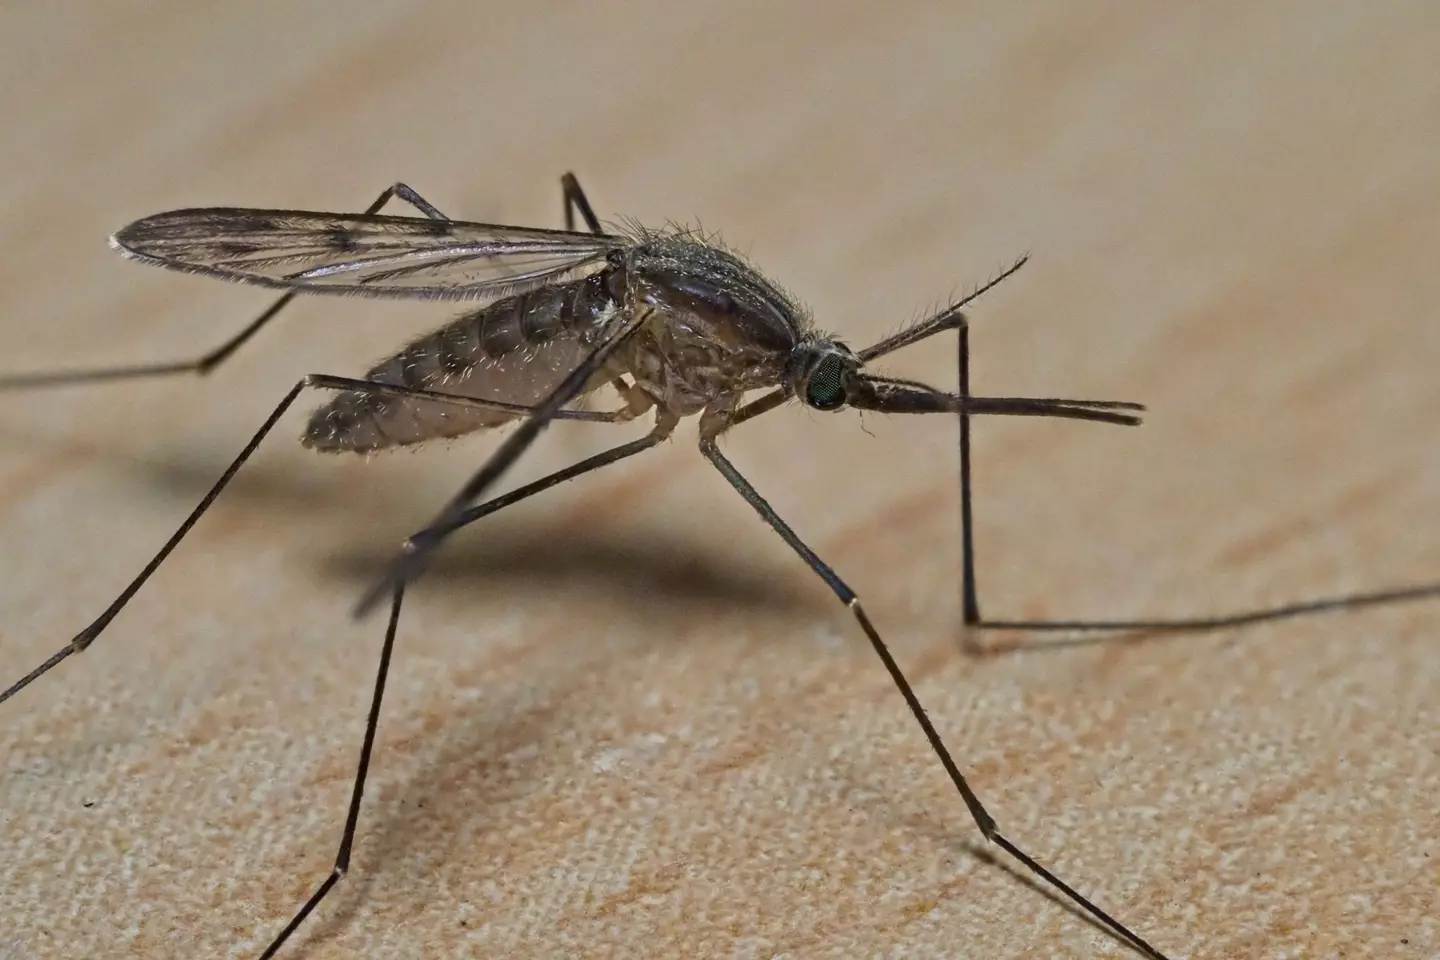 Mosquitos do in fact prefer some people to others.